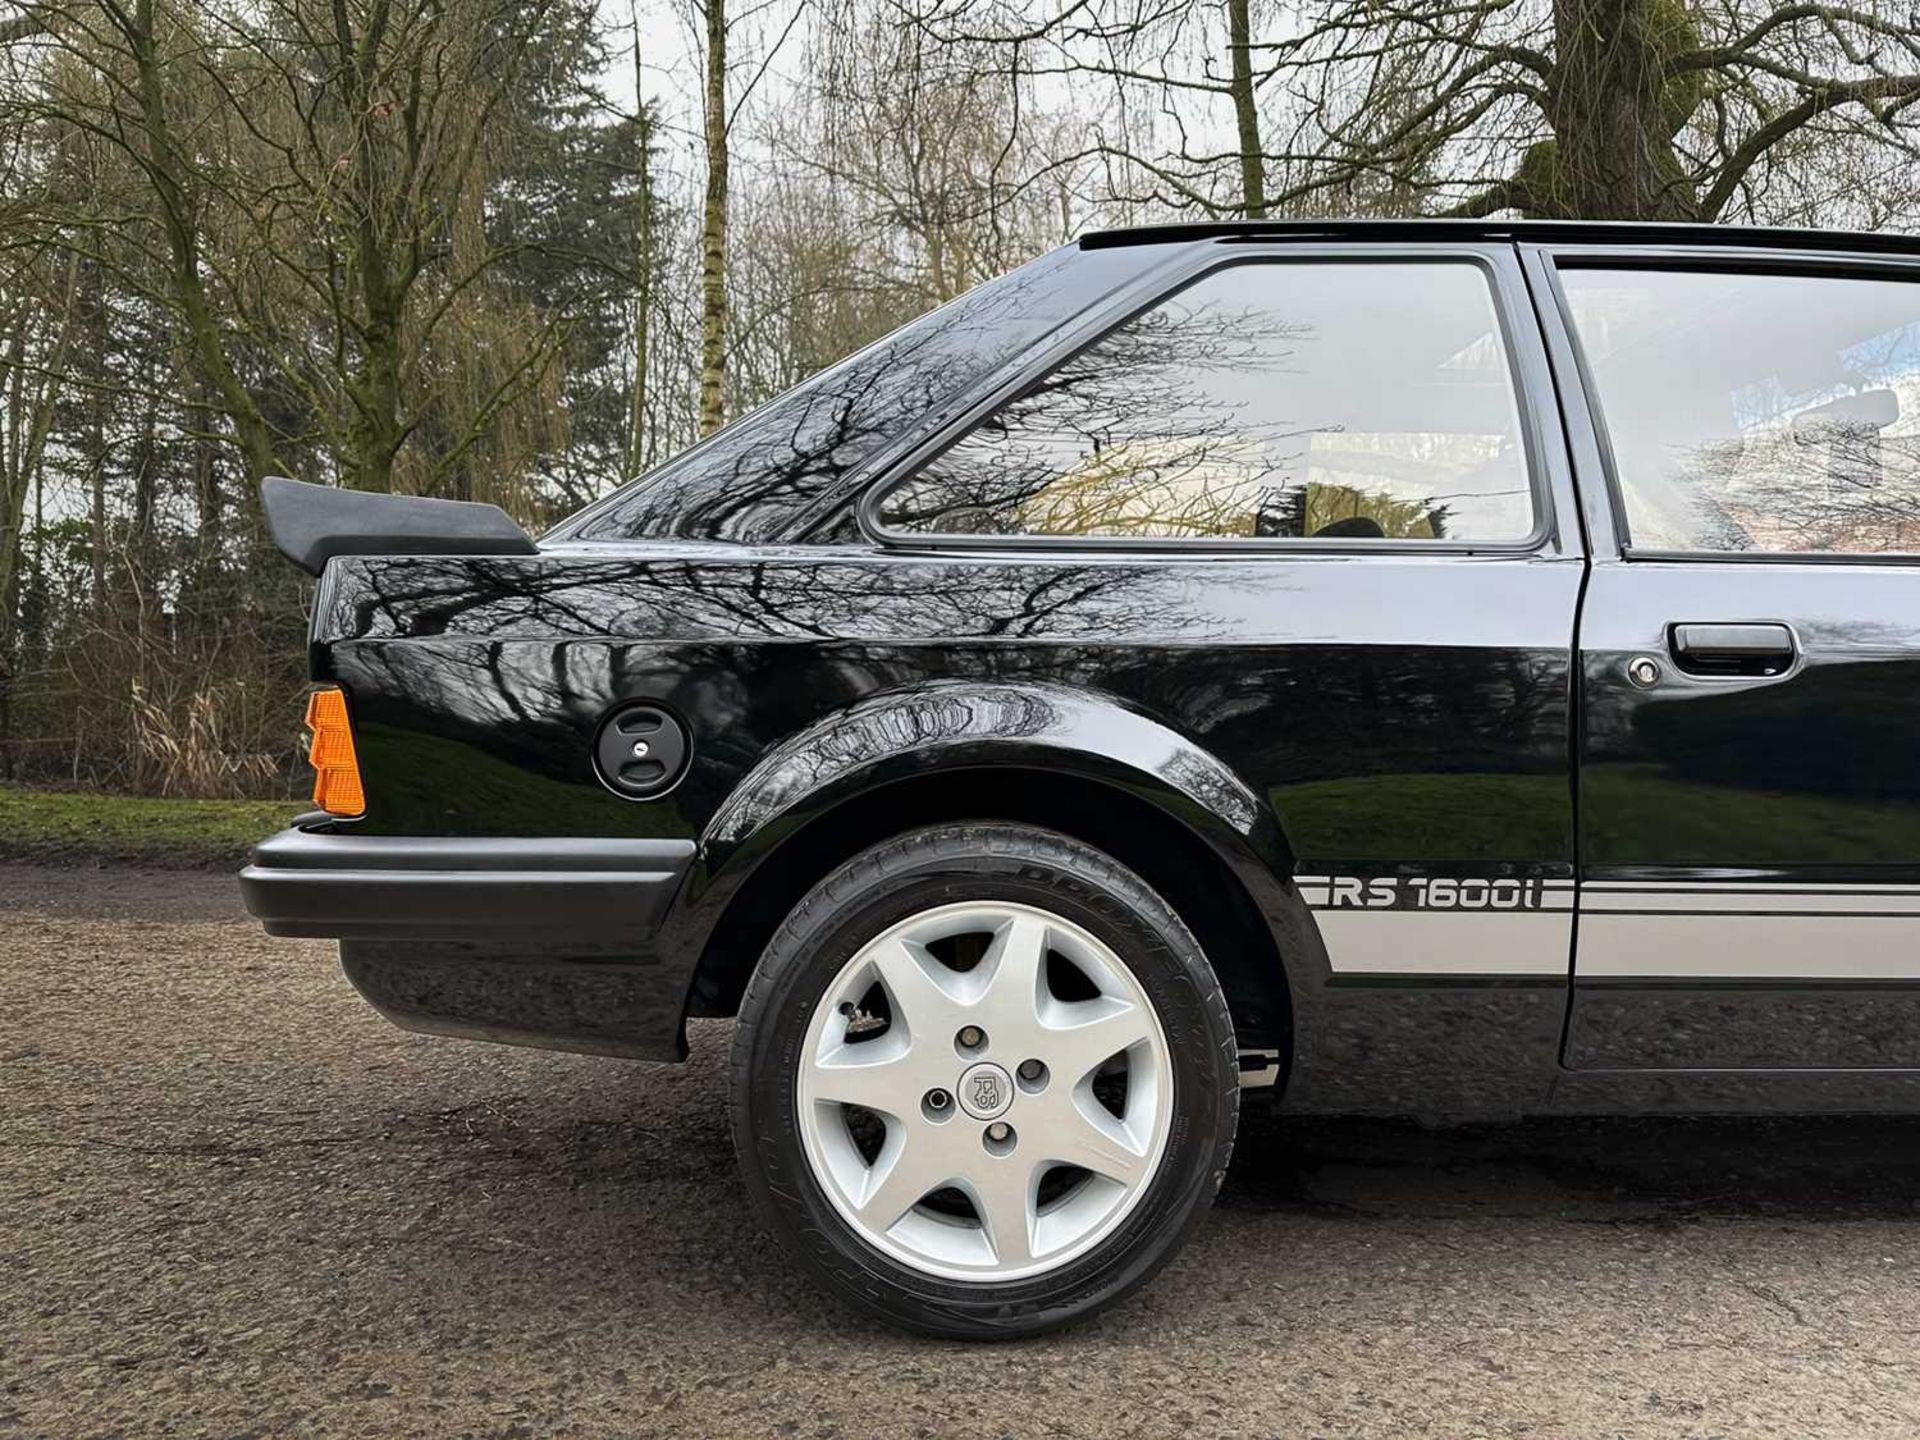 1983 Ford Escort RS1600i Entered from a private collection, finished in rare black - Image 69 of 100